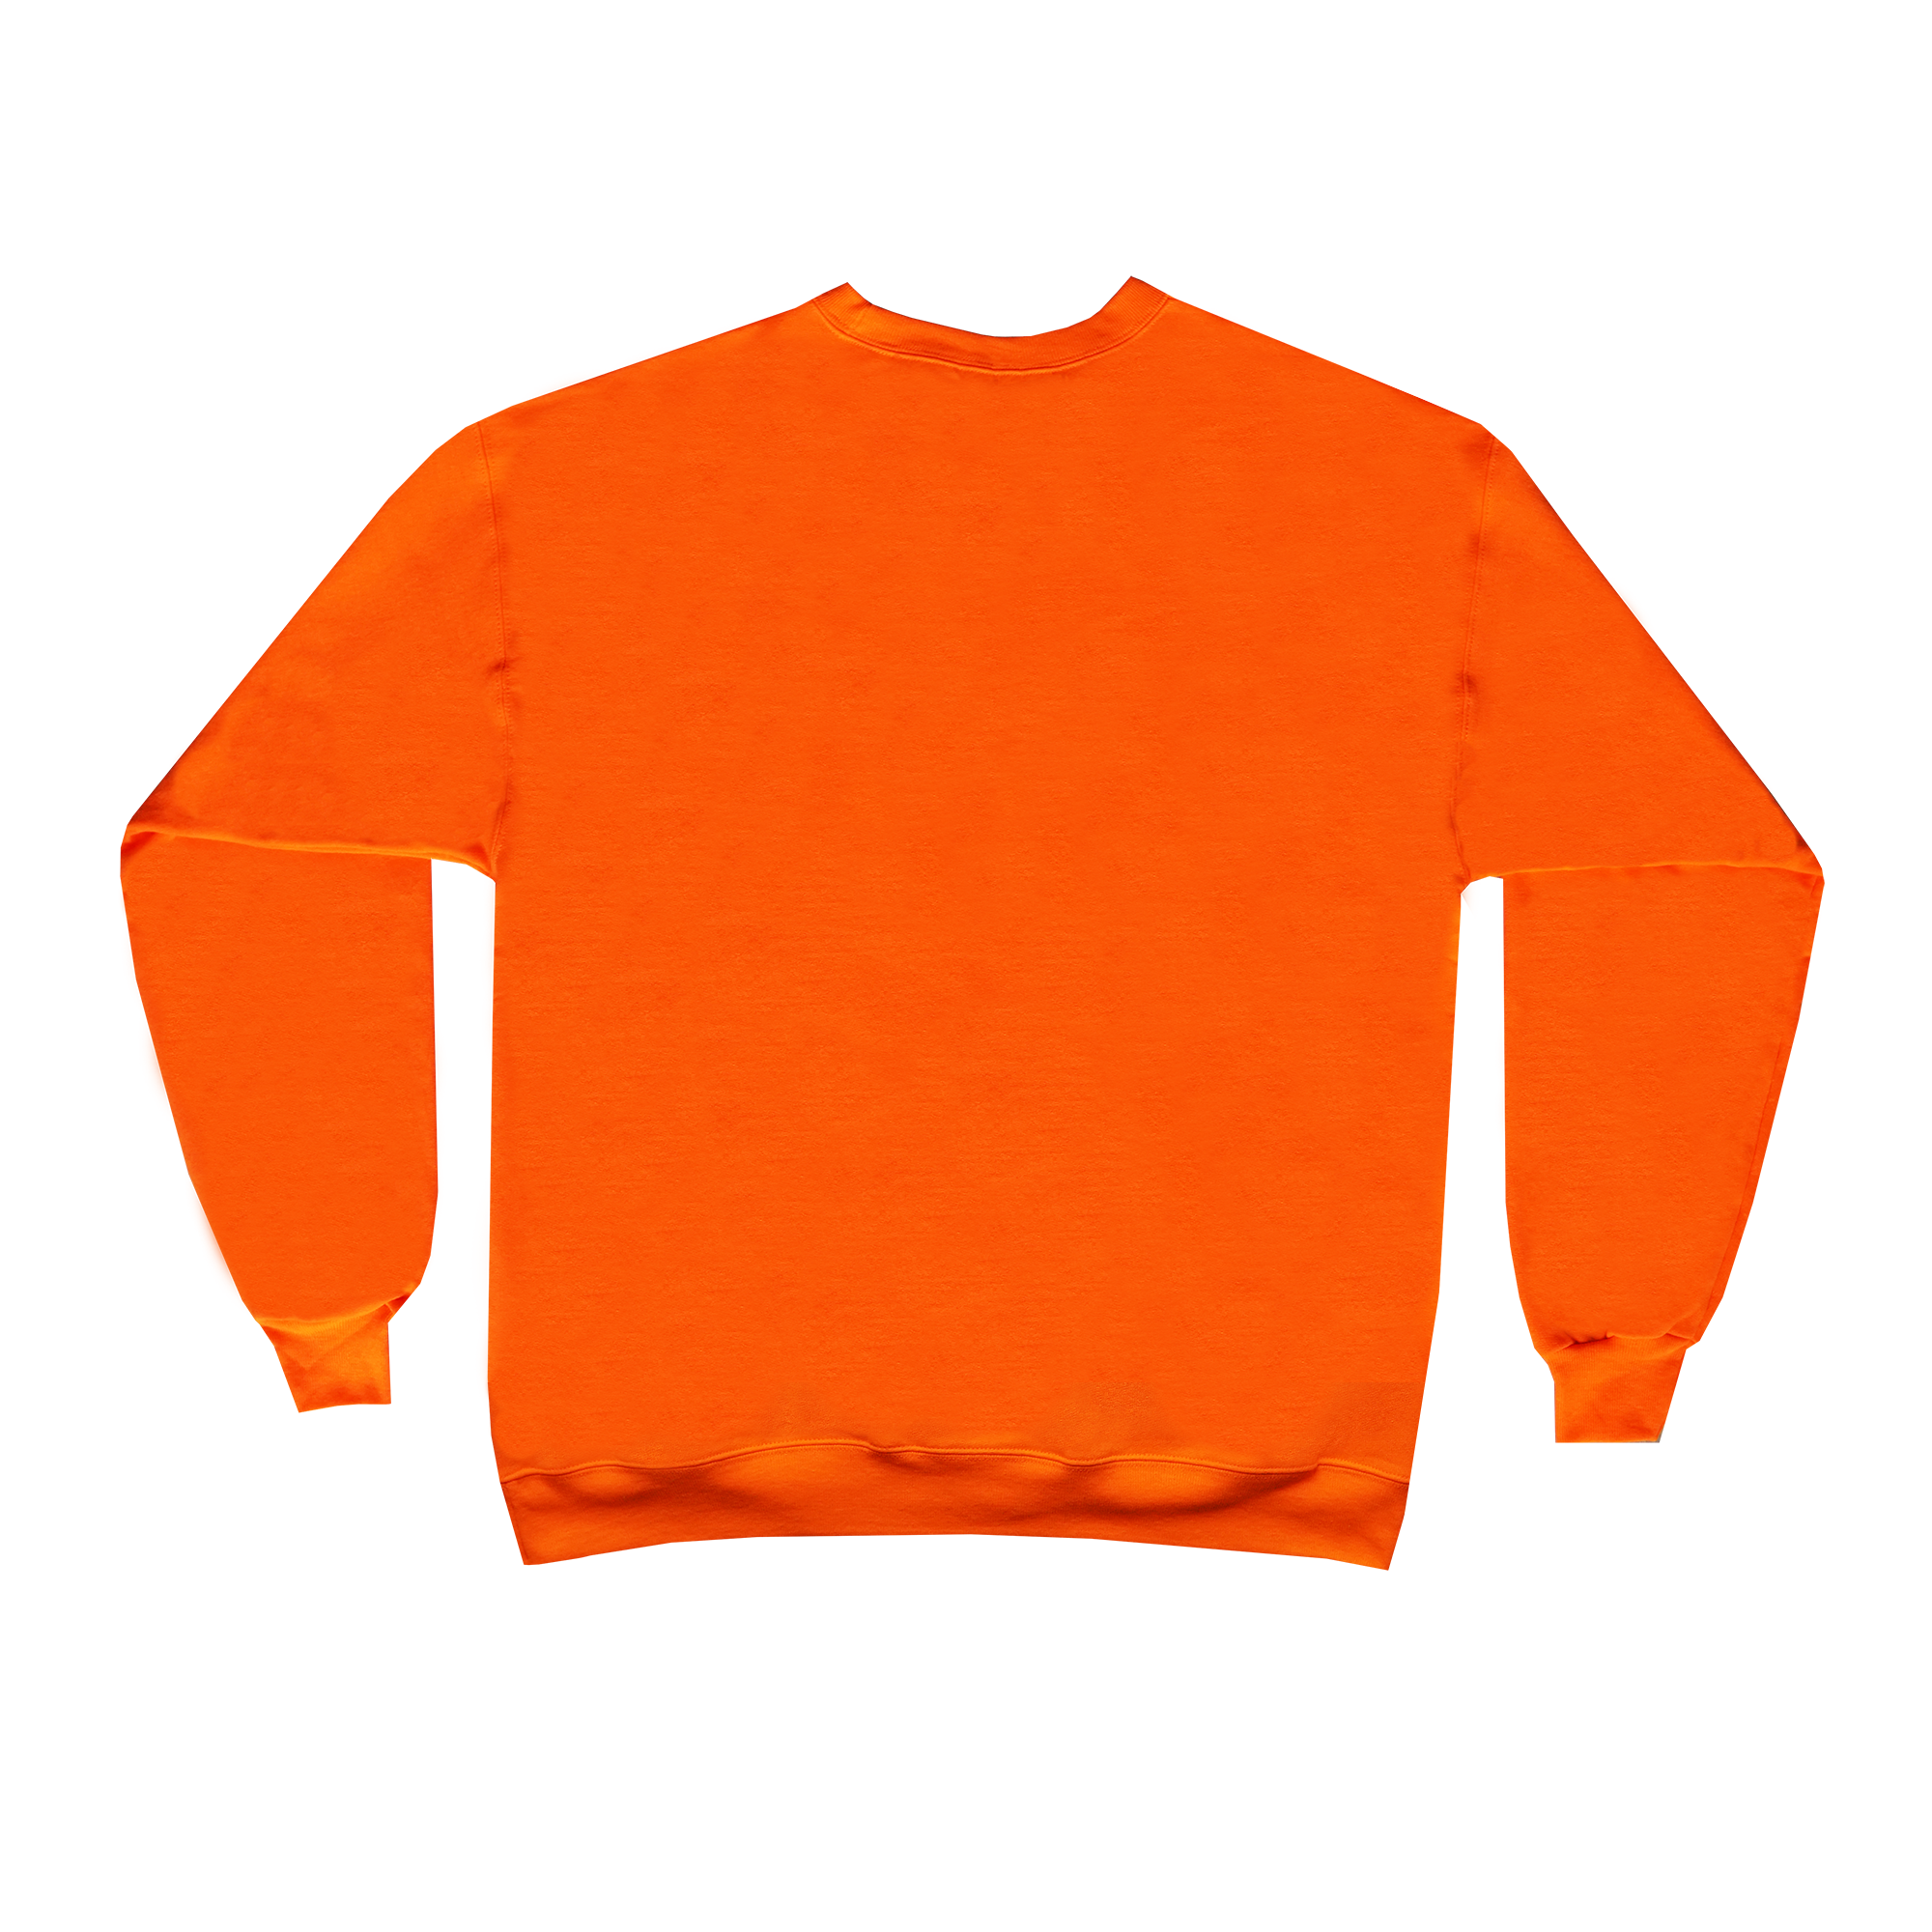 Fool’s Gold “Spell Out” Crewneck - Safety Orange